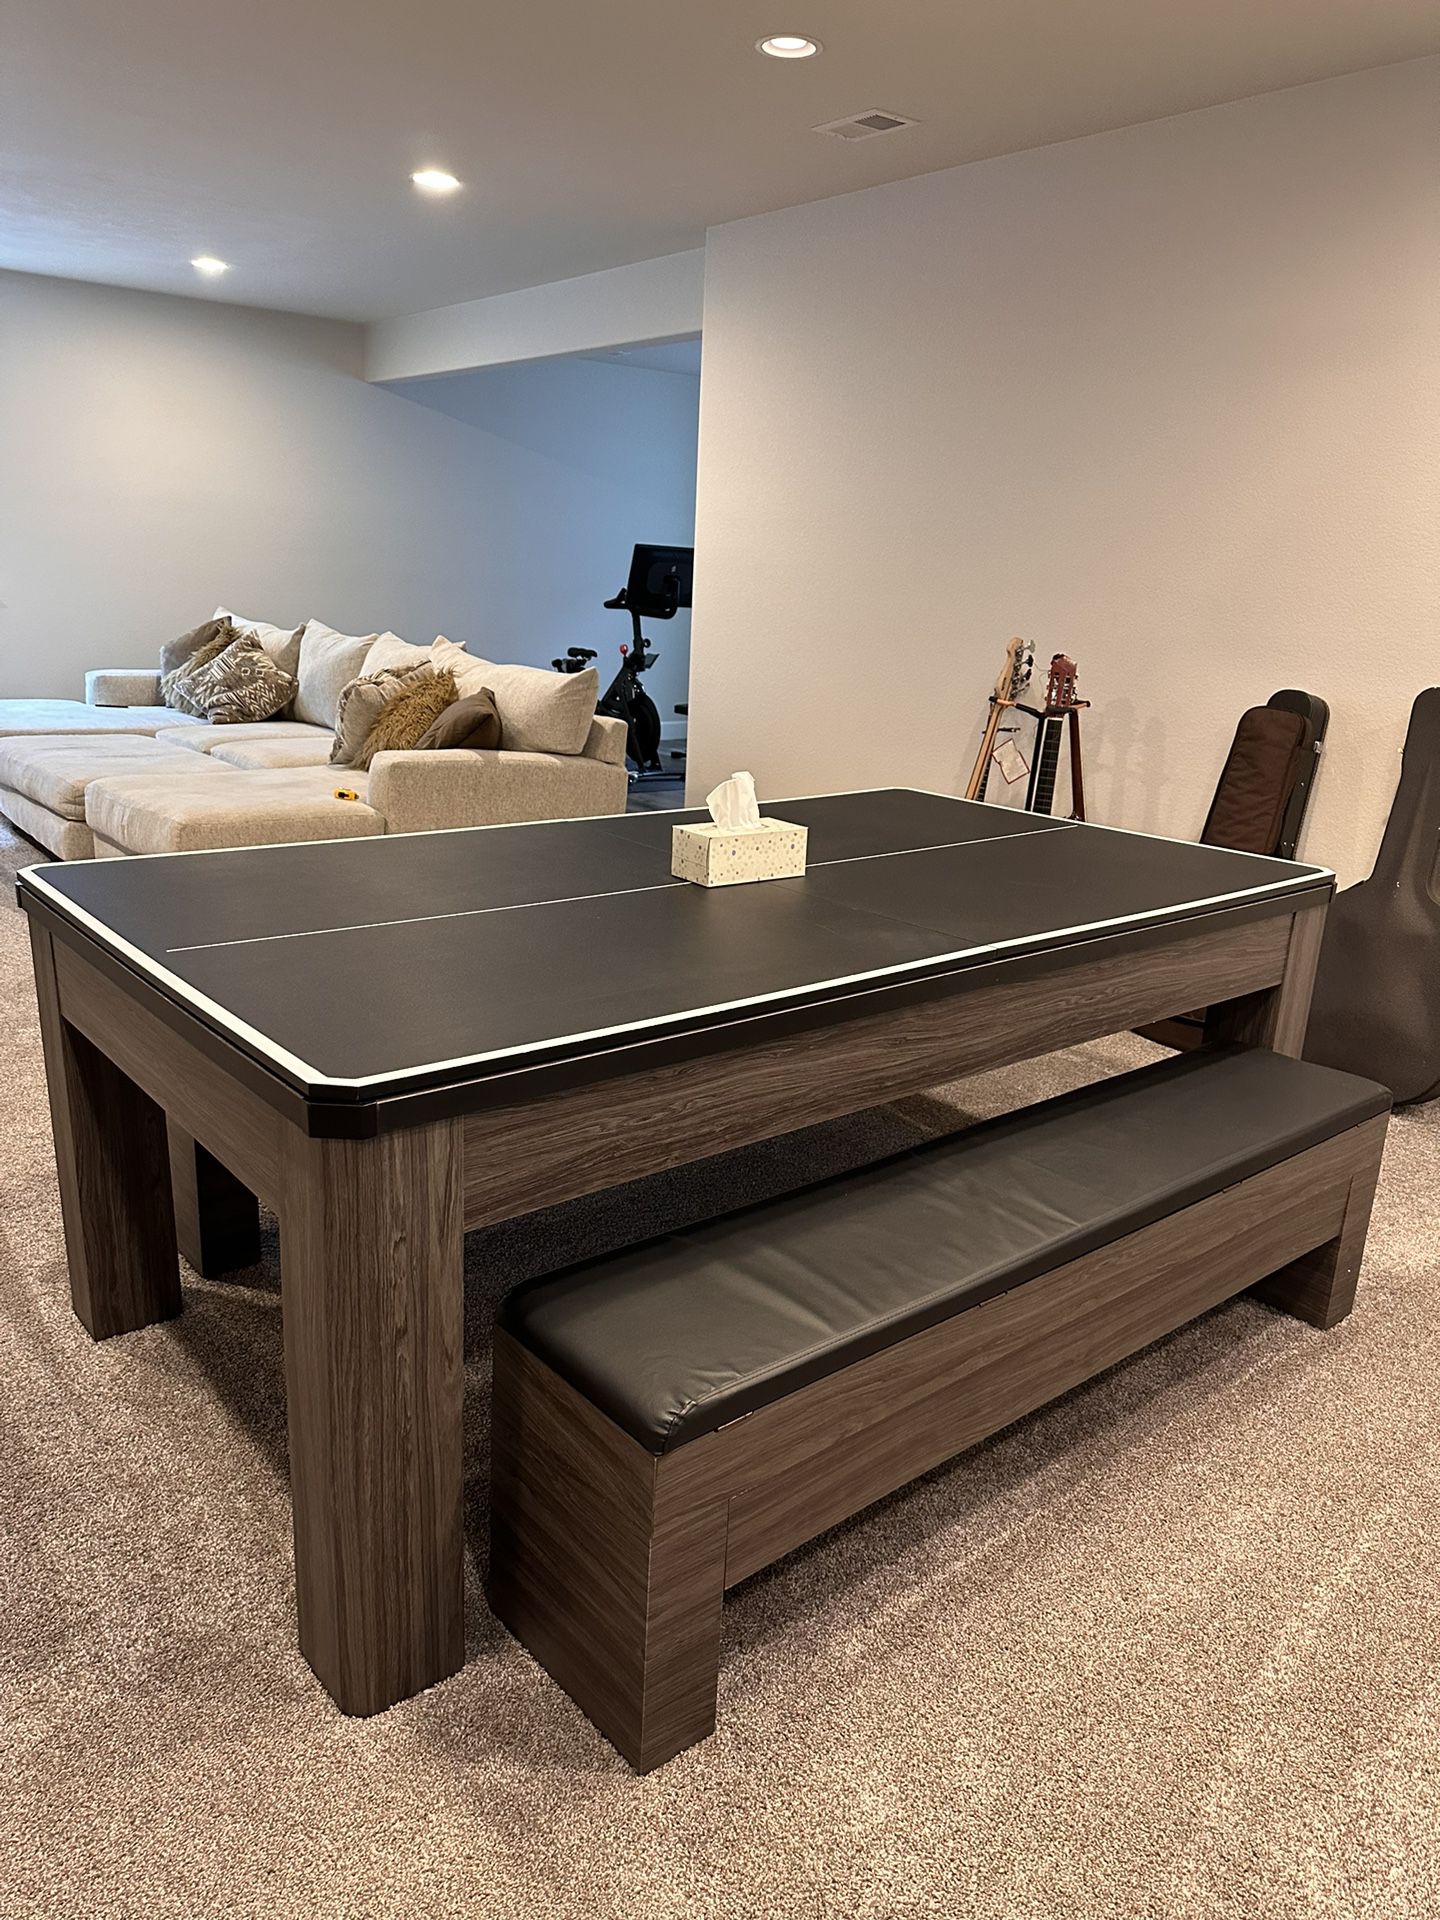 3-in-1 combination table: dining table, pool, and table tennis